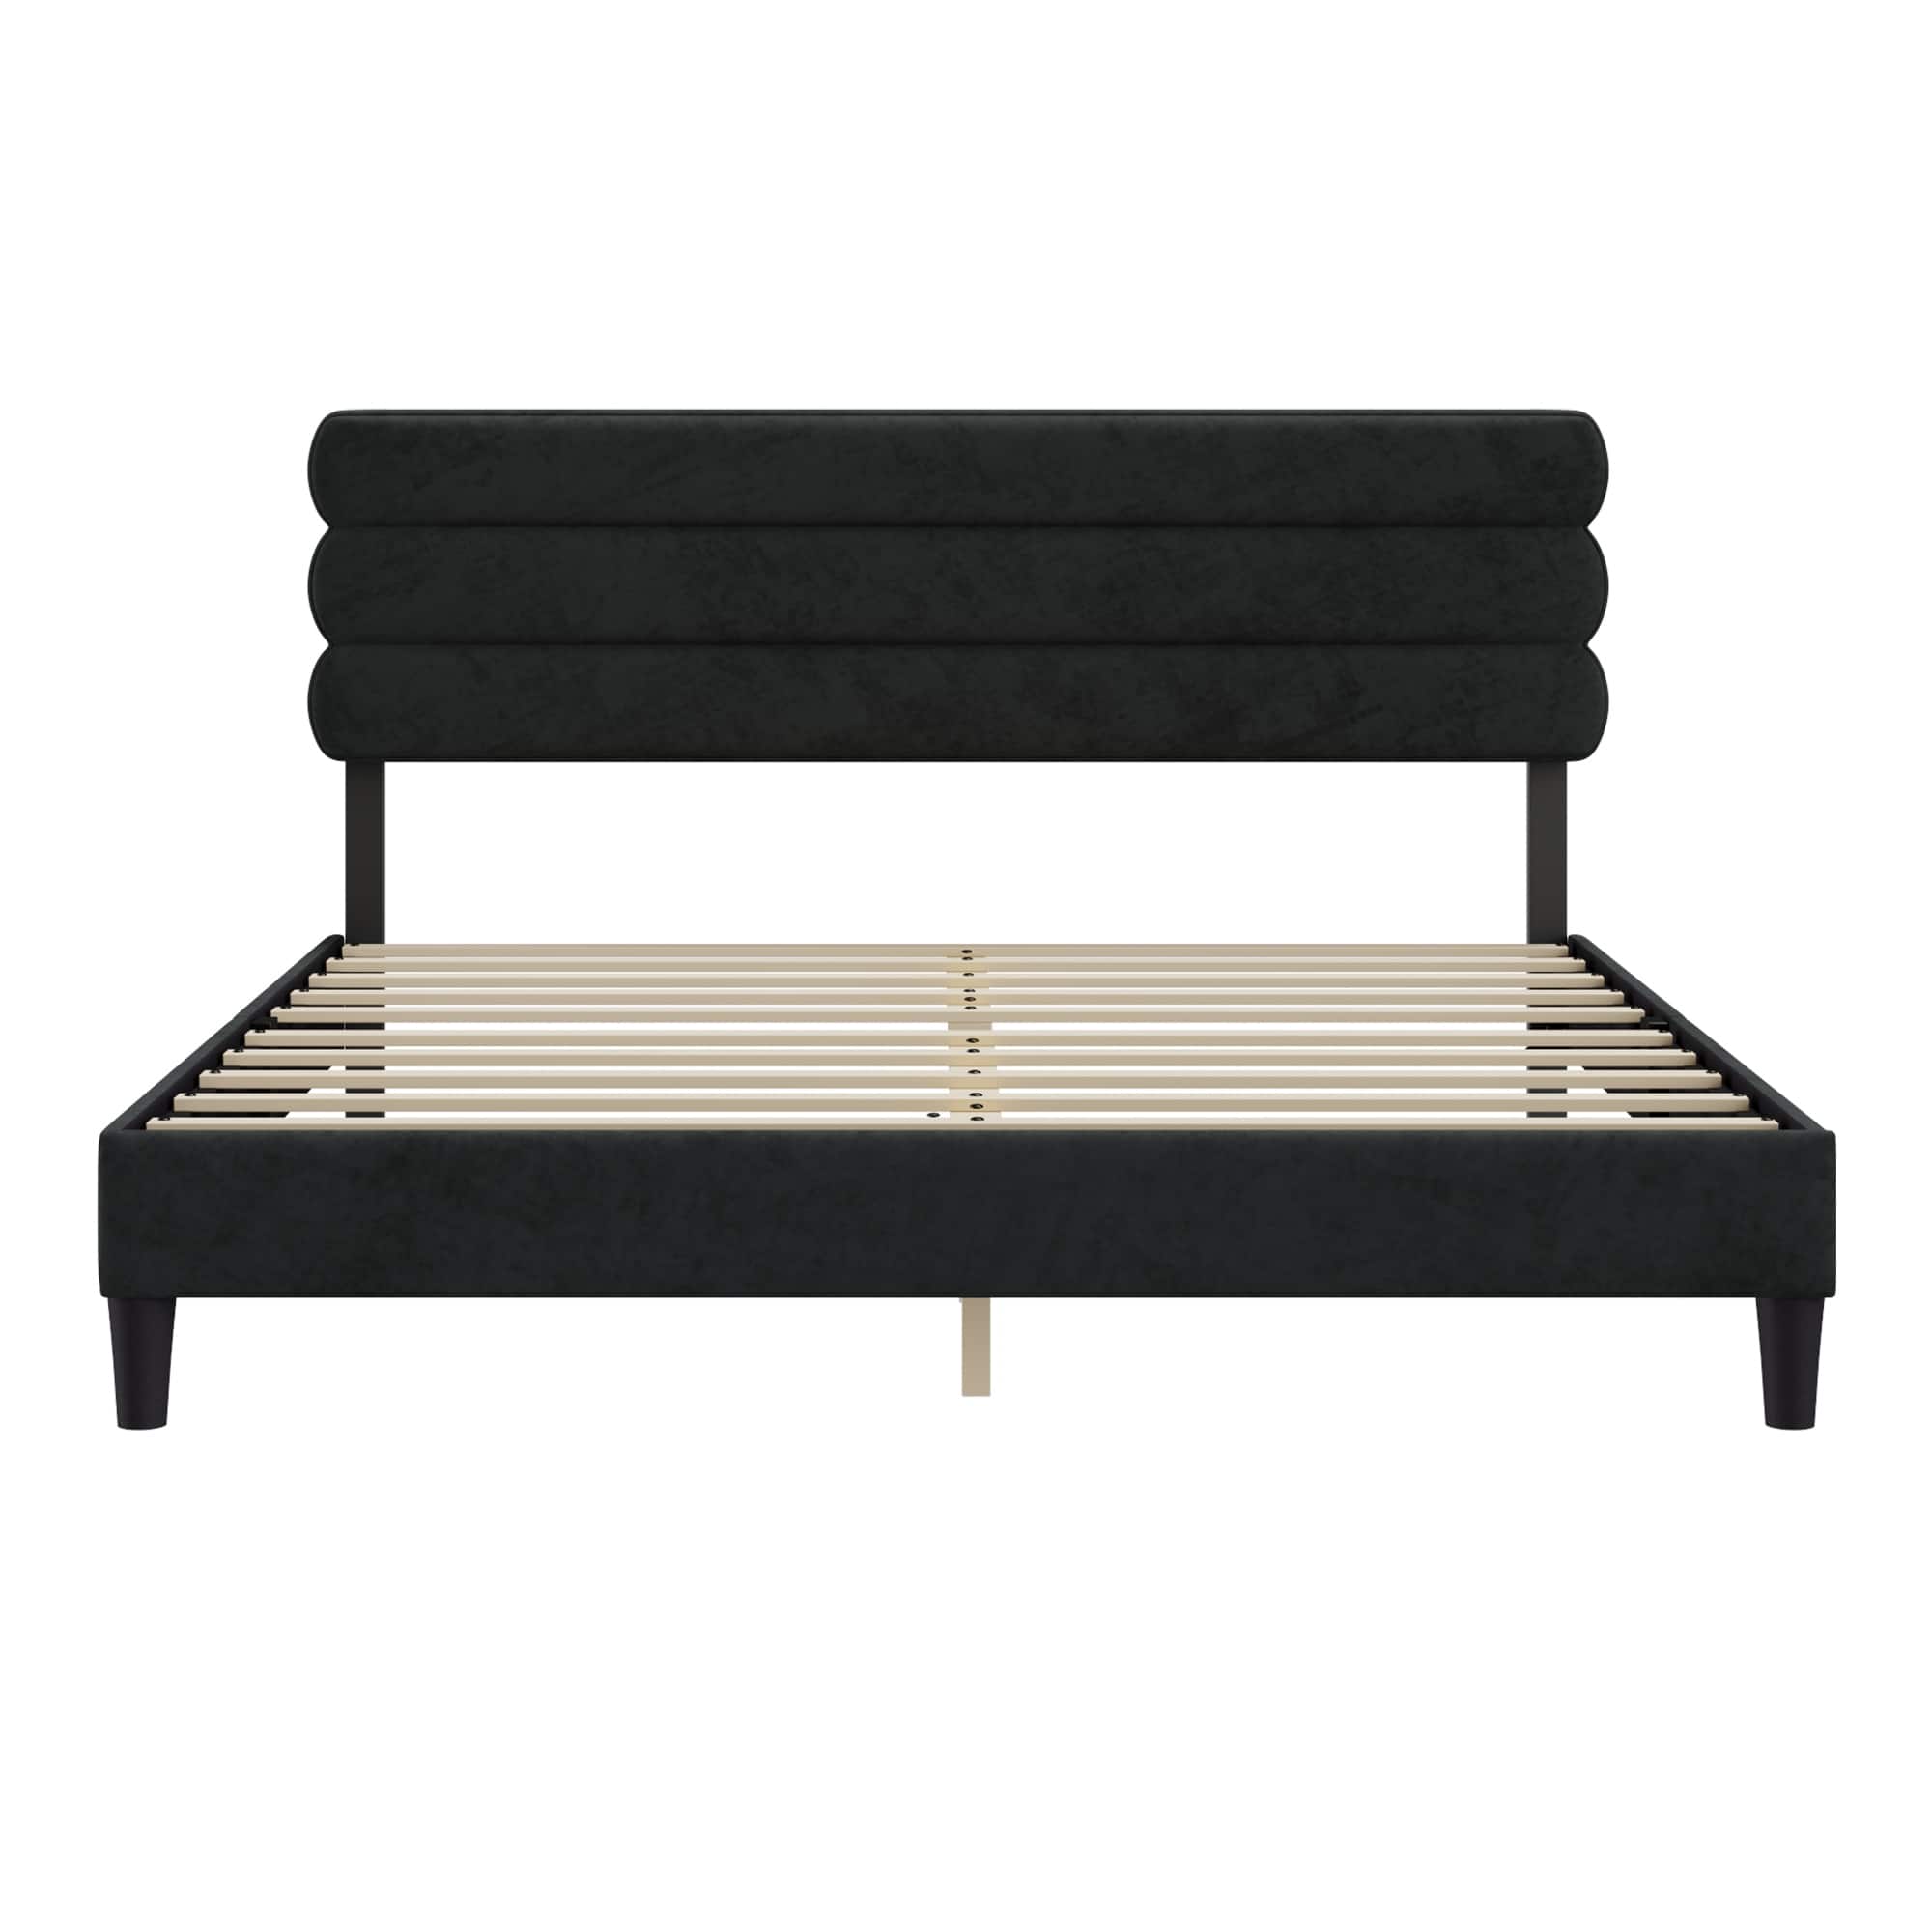 King Size Bed Frame with Headboard, Sturdy Platform Bed with Wooden ...